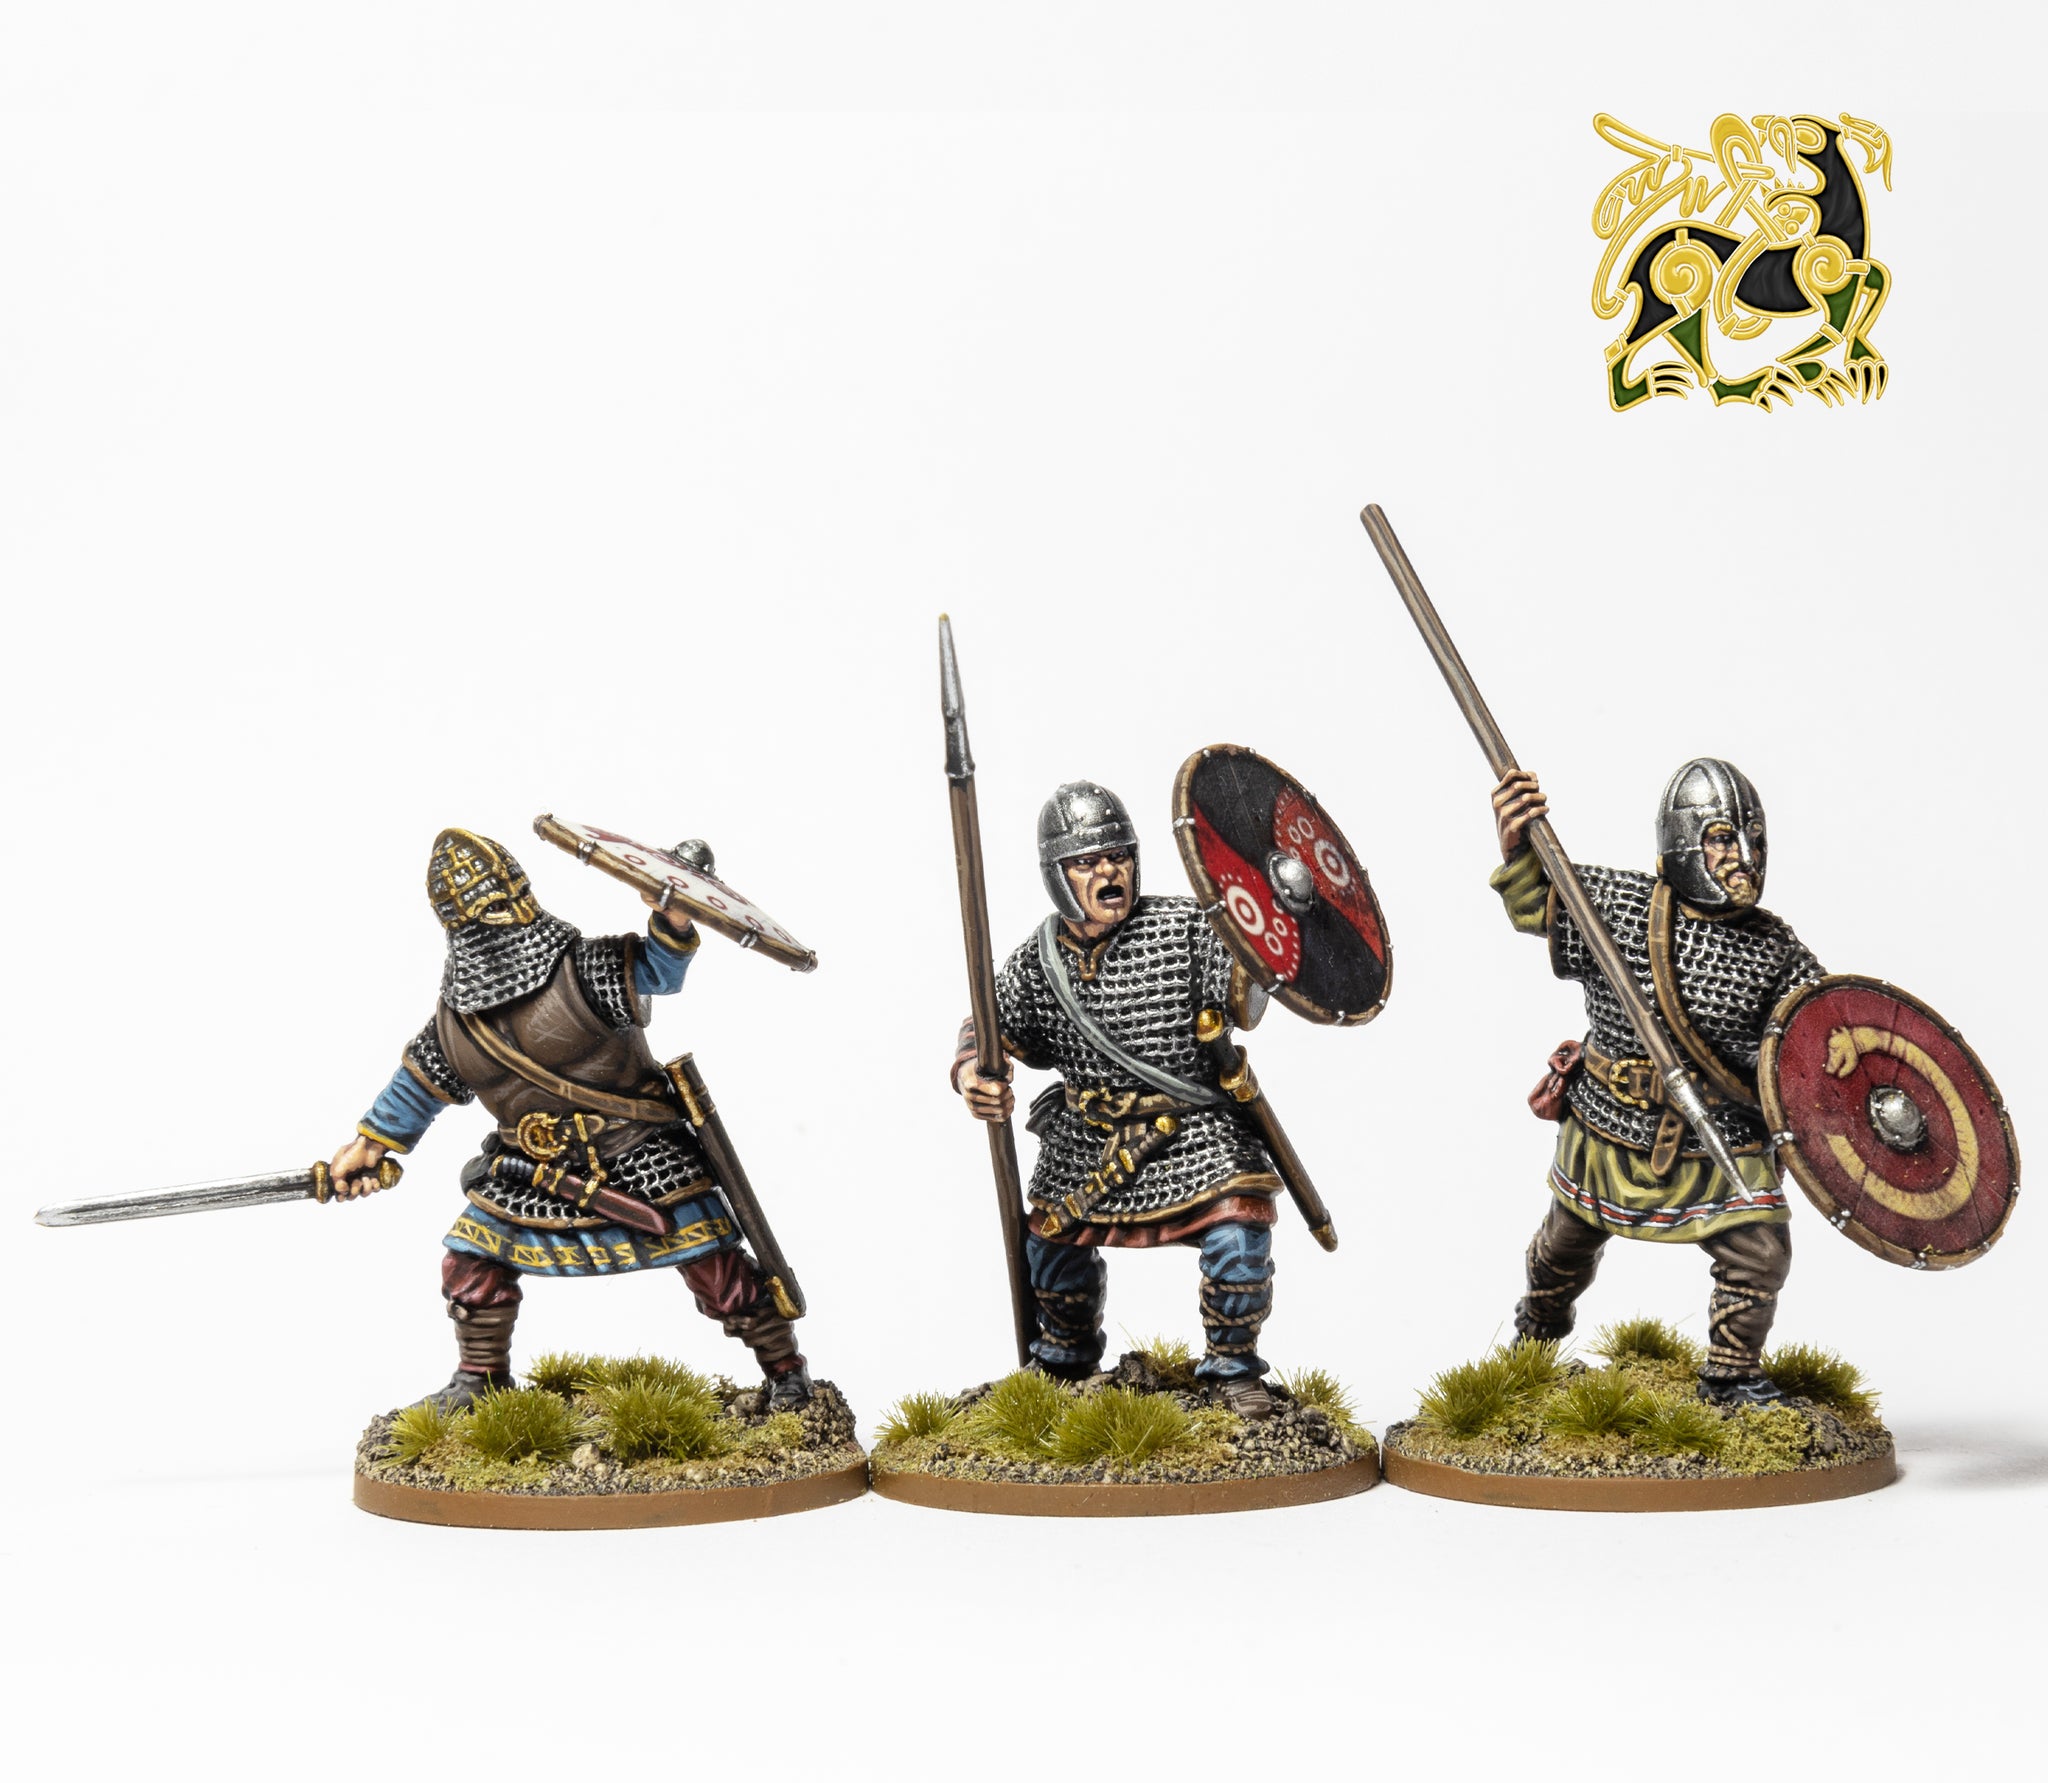 [victrix] early armoured saxons Painted3_fd261539-e041-41c1-9903-323b4f299a3b_2048x